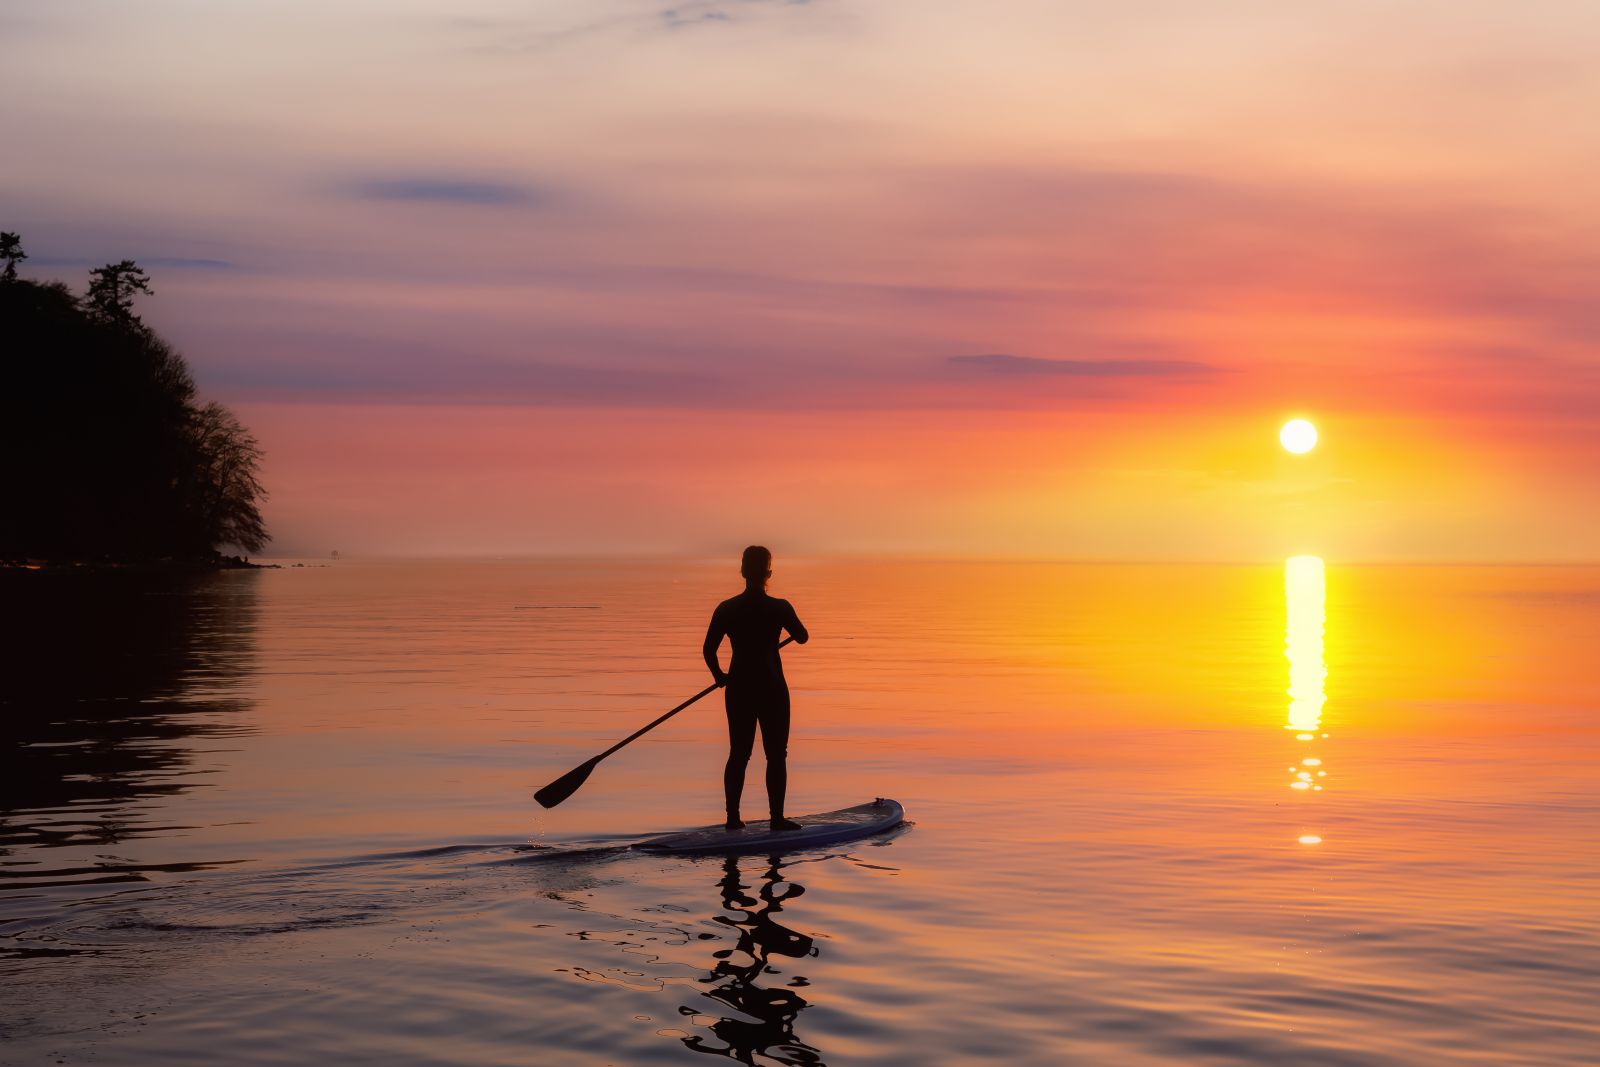 Silhouette of a surfer with a paddle standing on a paddleboard, gliding over calm waters against a stunning sunset, reflecting the serene and beautiful ambiance of paddleboarding.